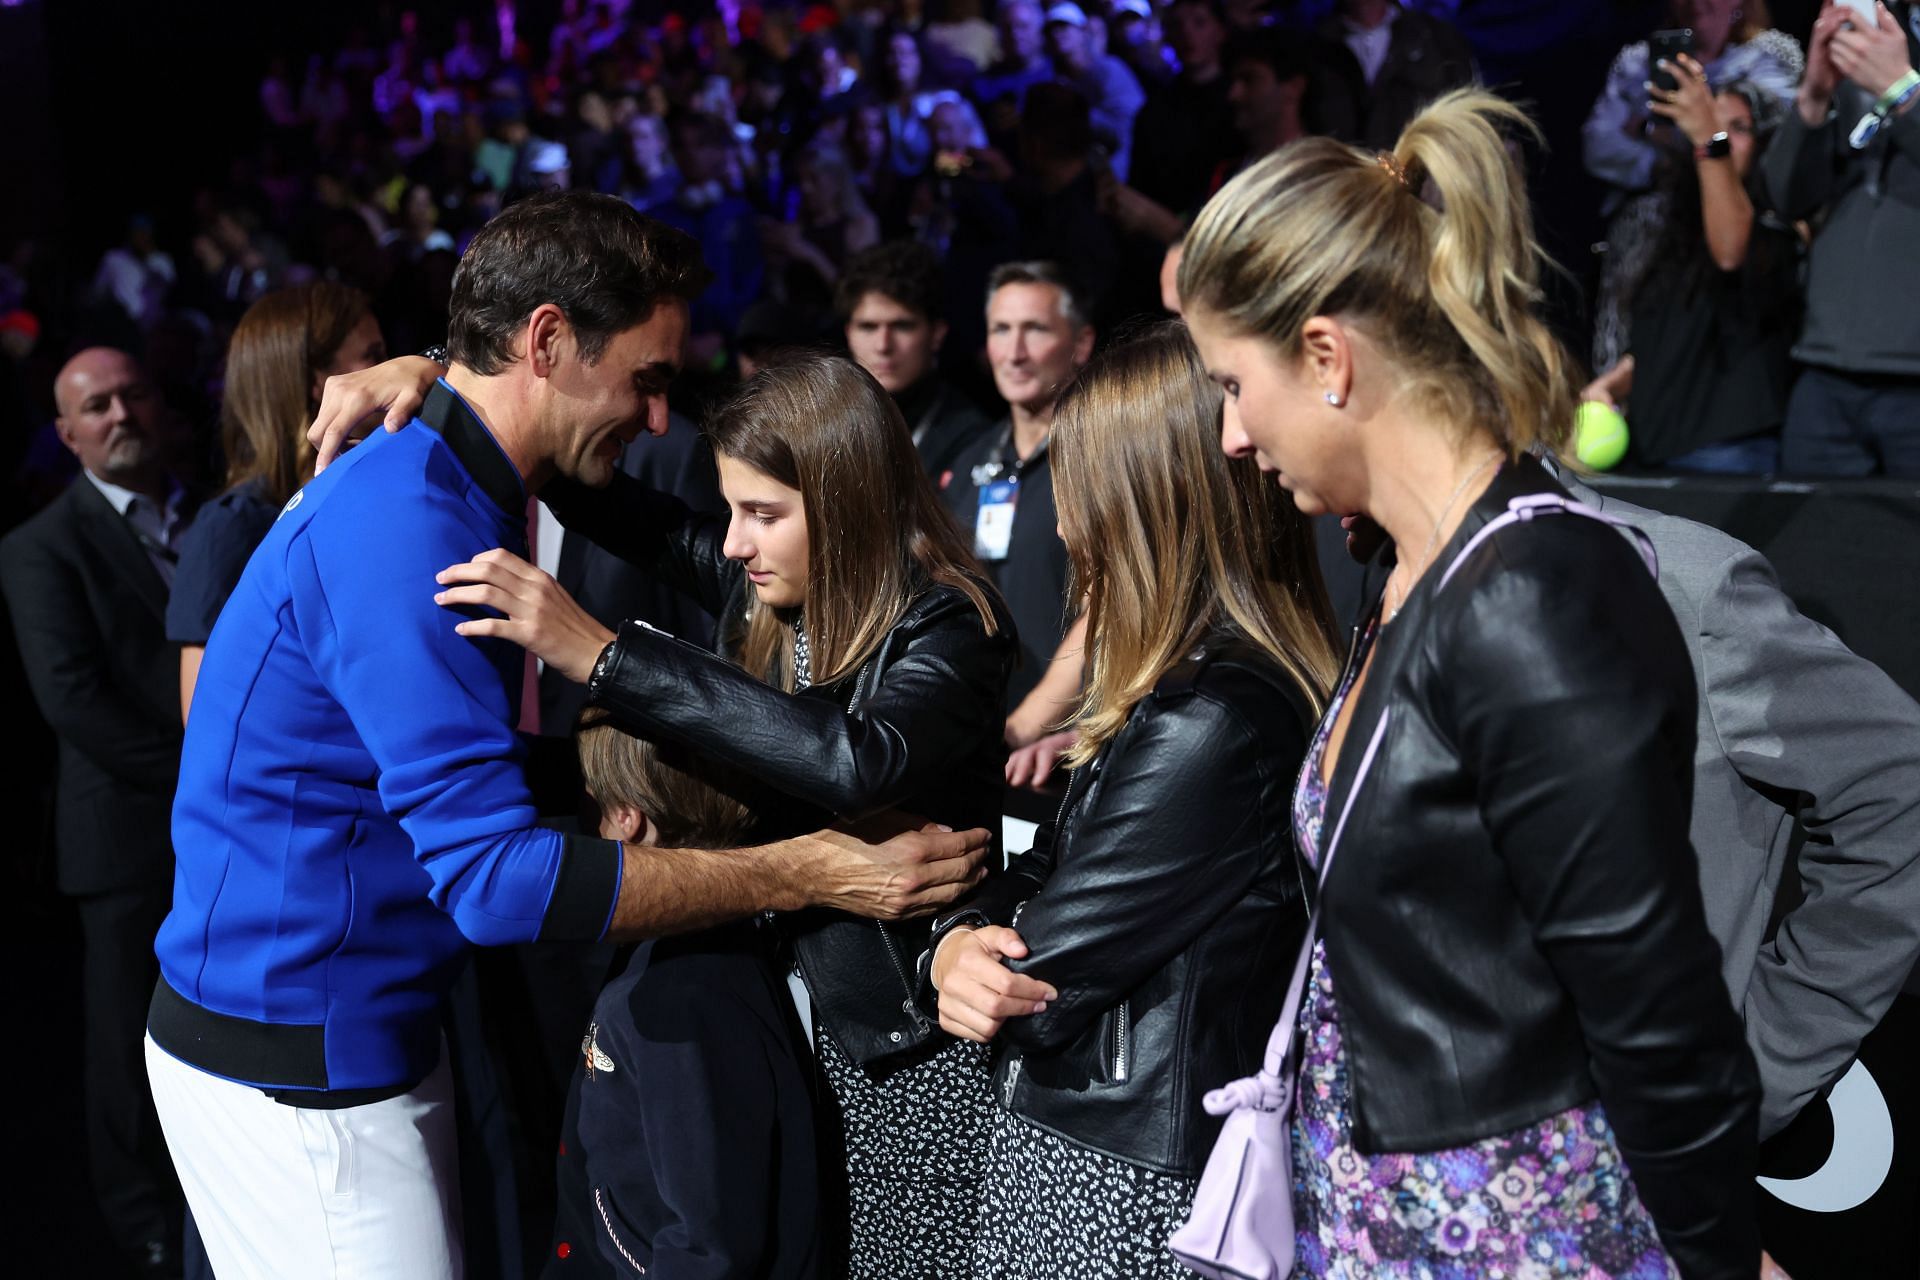 Roger Federer and his family at the Laver Cup 2022